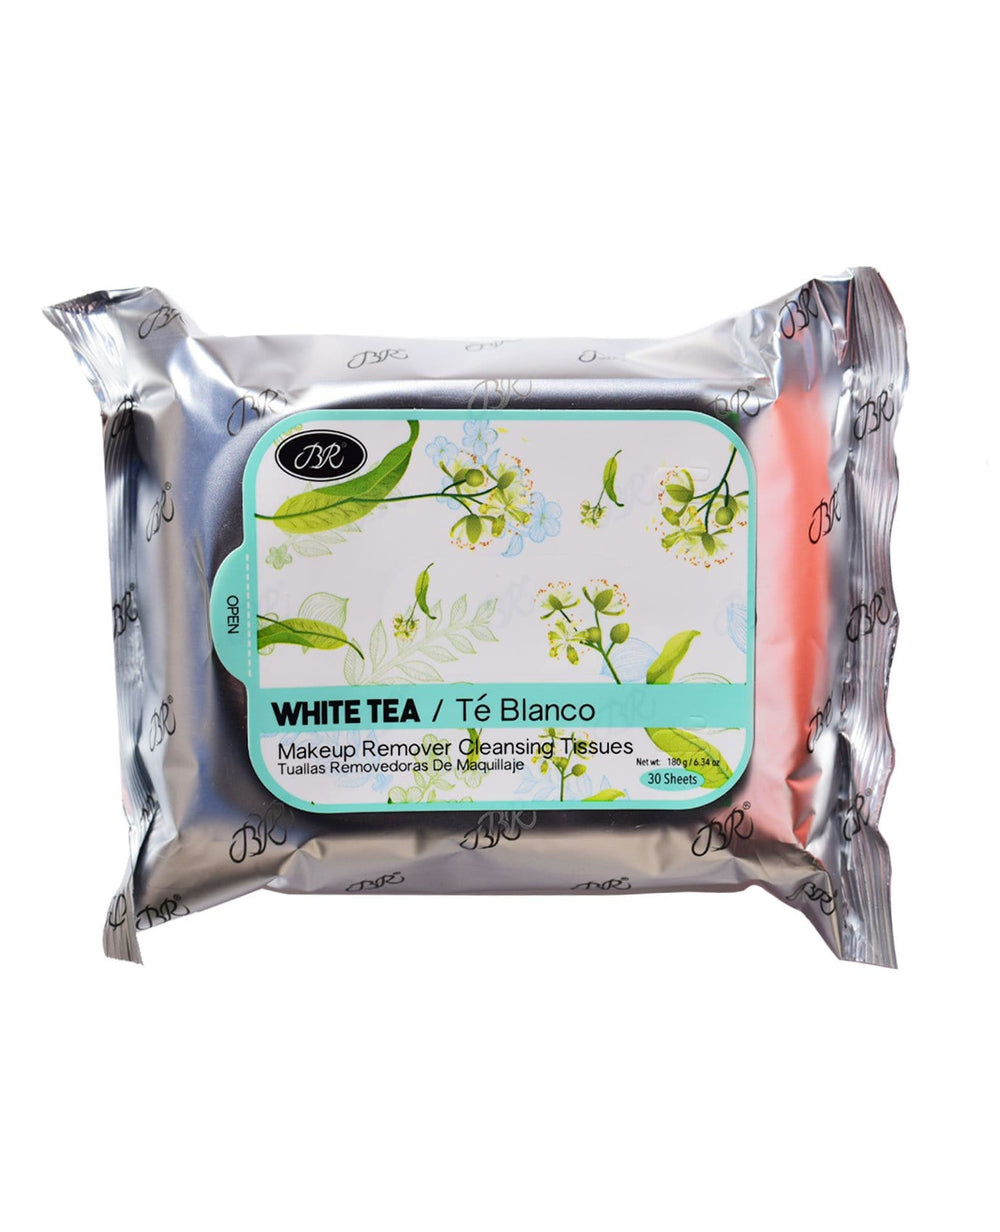 Br Makeup Remover Cleansing Towelettes - White Tea